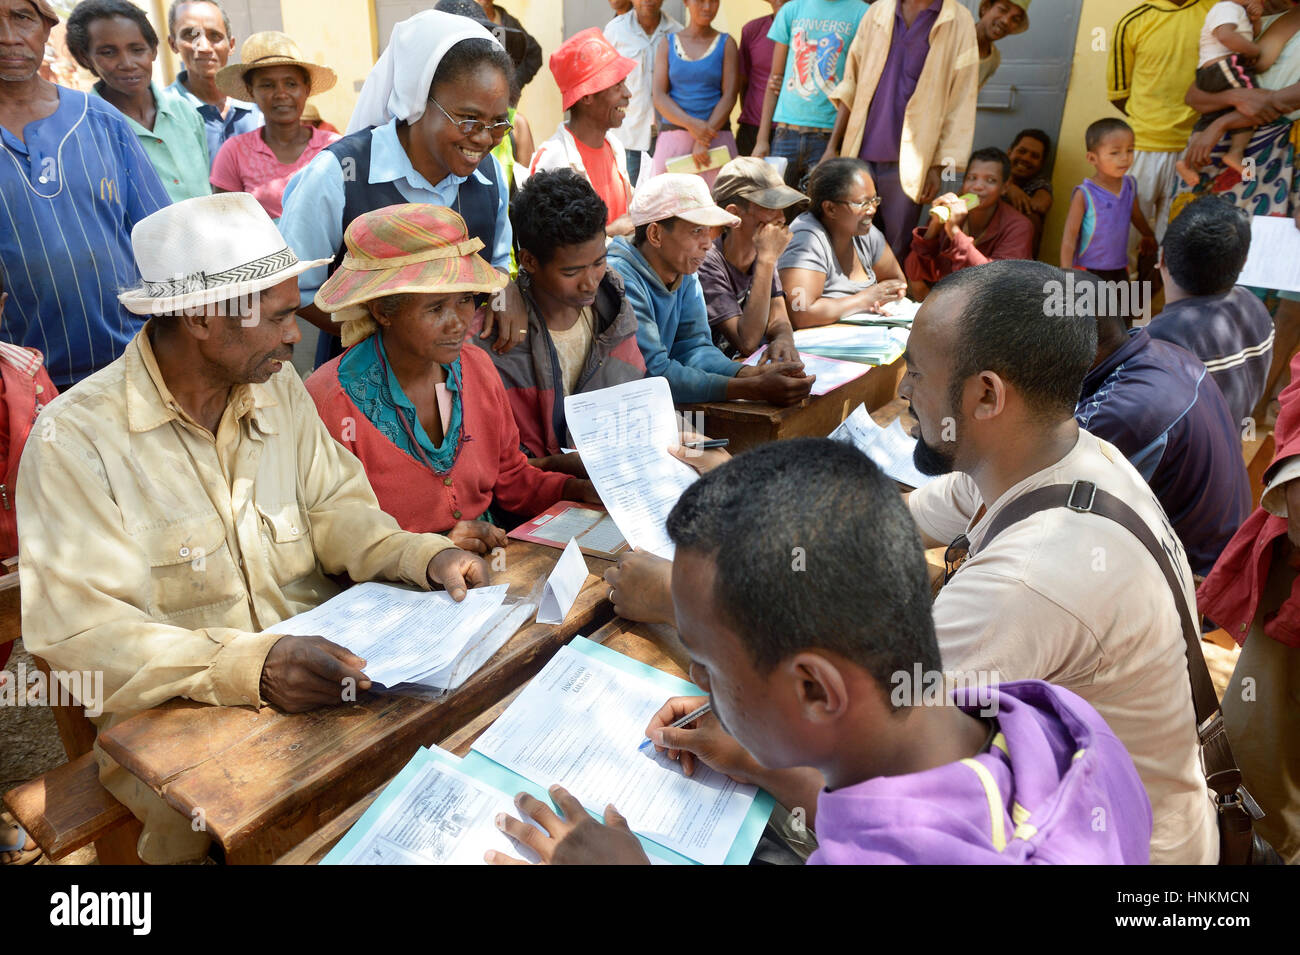 Villagers fill out applications for certification of their land on the village square, Analakely village, Tanambao commune Stock Photo